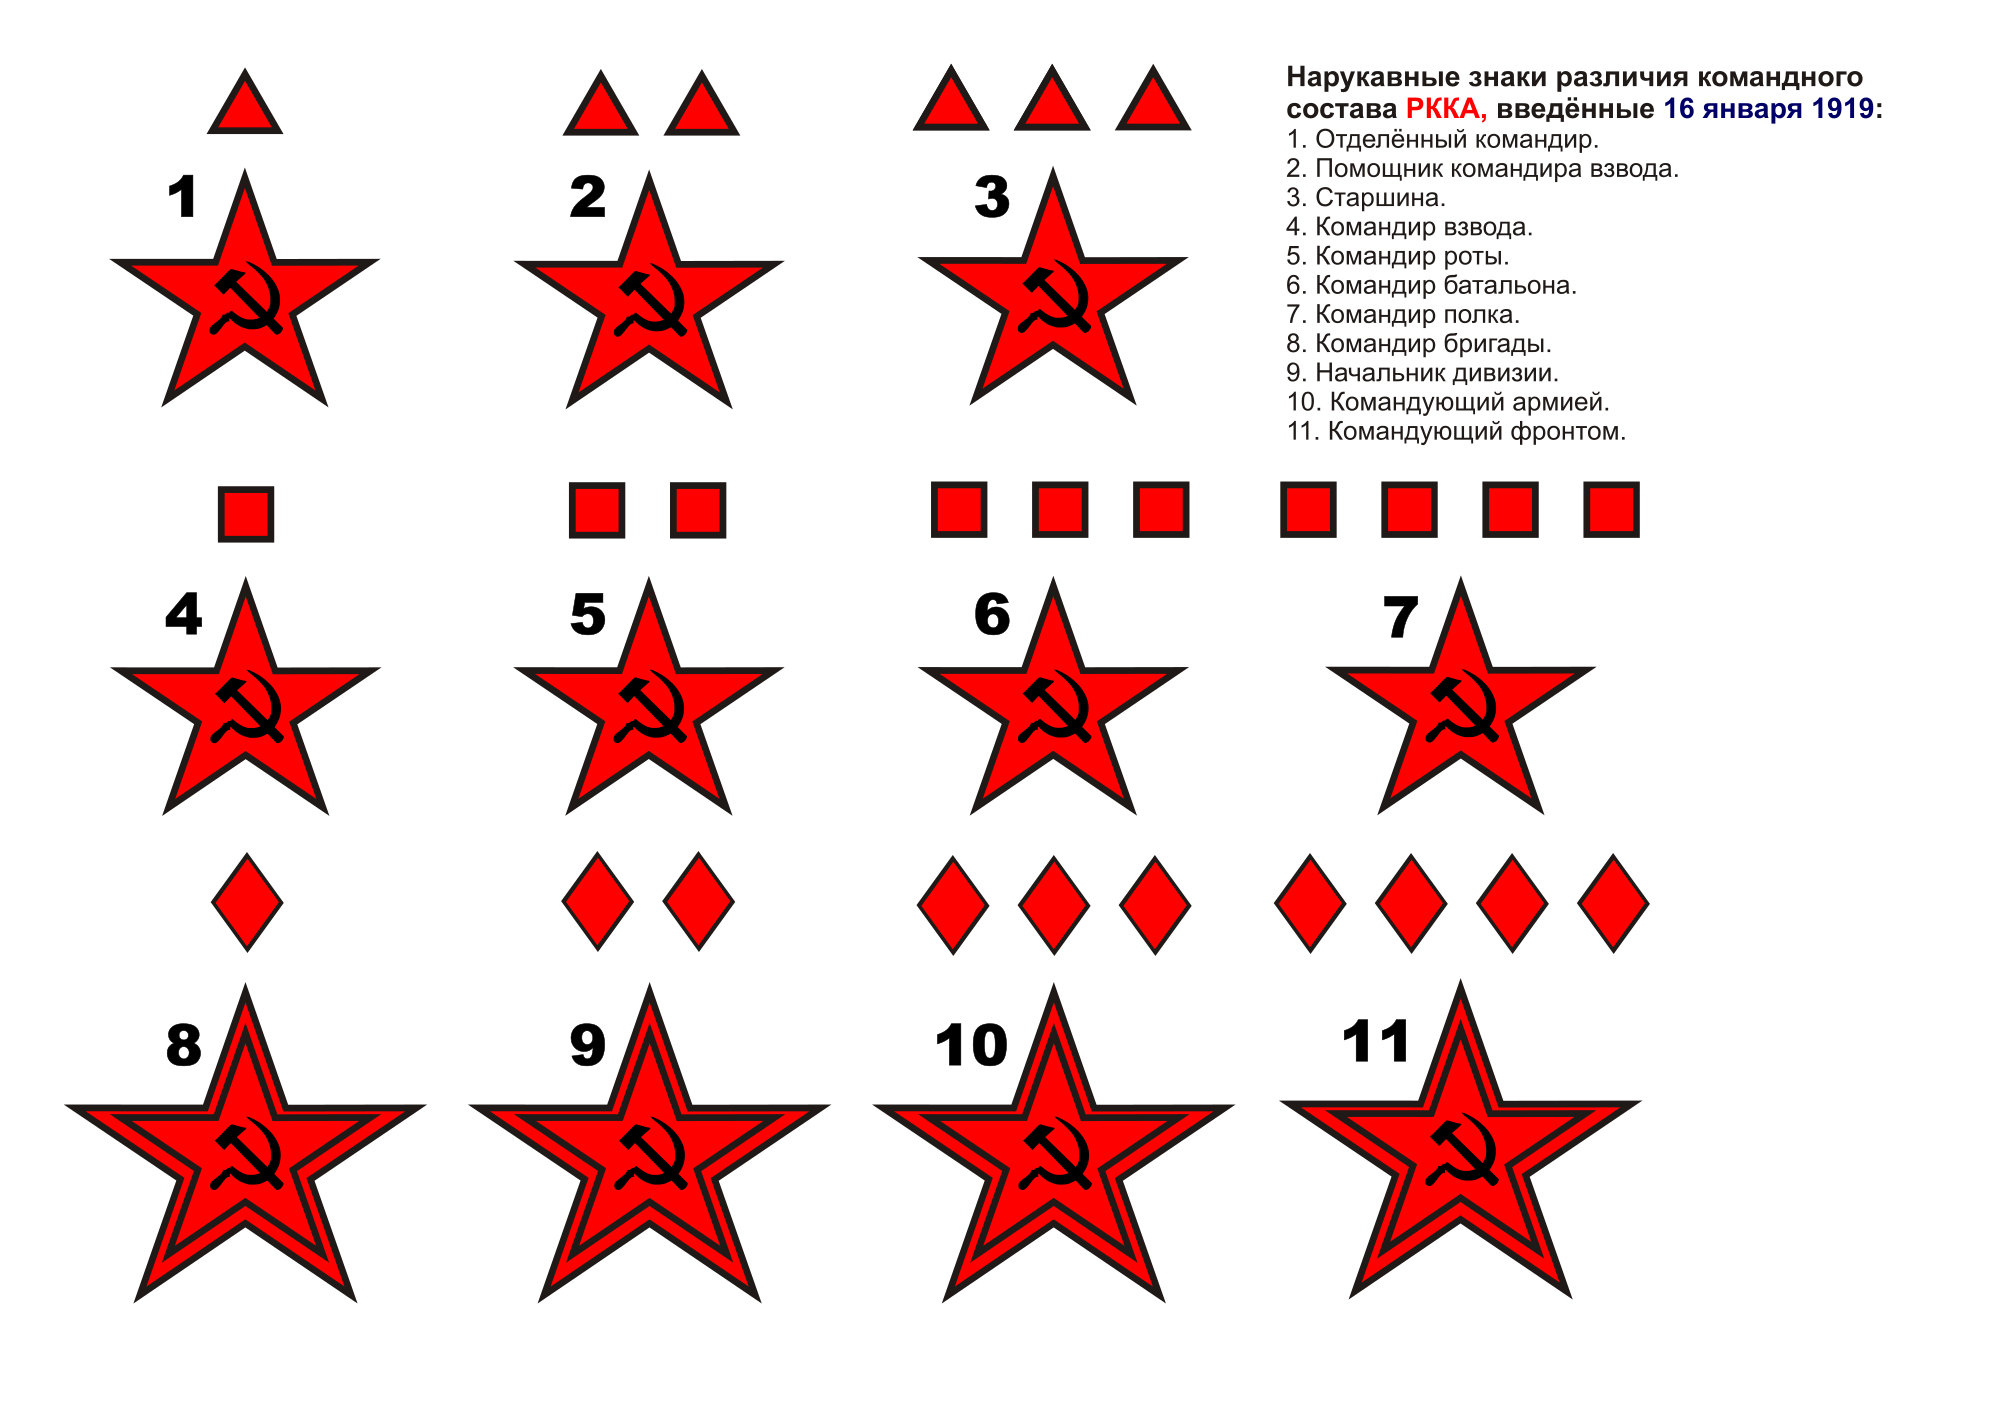 Red army wikipedia russian. Military clipart invasion